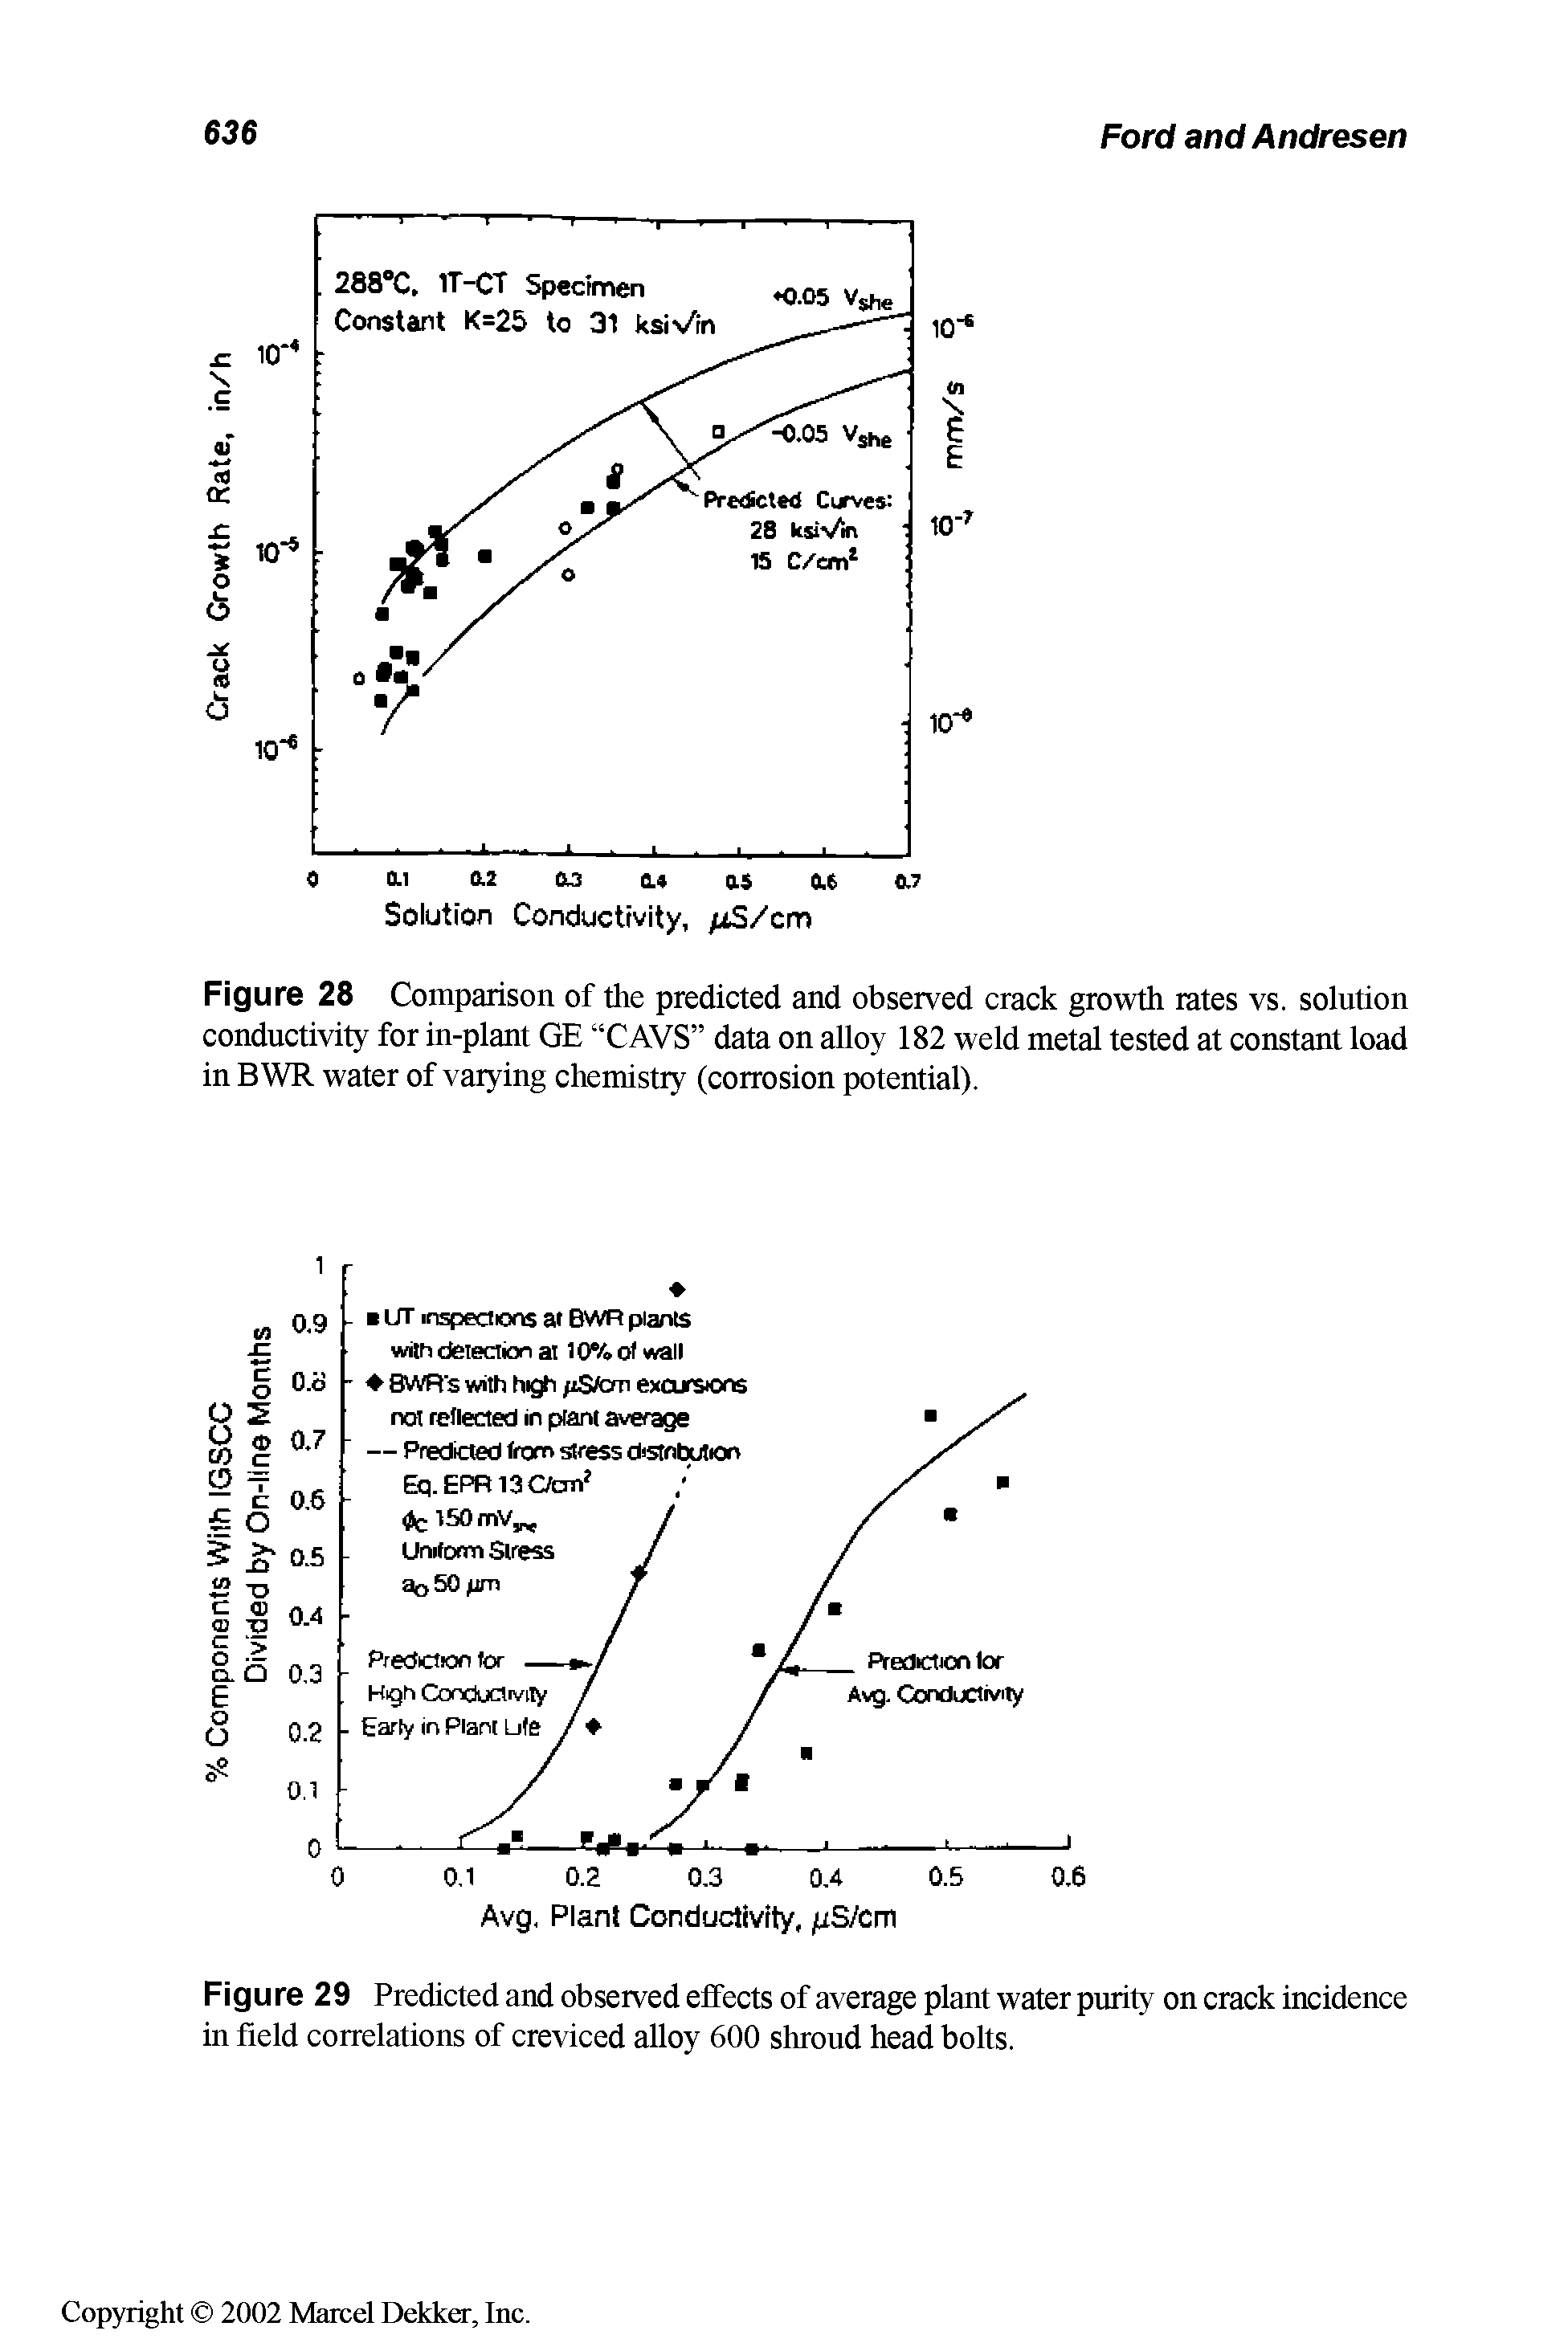 Figure 28 Comparison of the predicted and observed crack growth rates vs. solution conductivity for in-plant GE CAVS data on alloy 182 weld metal tested at constant load in BWR water of varying chemistry (corrosion potential).